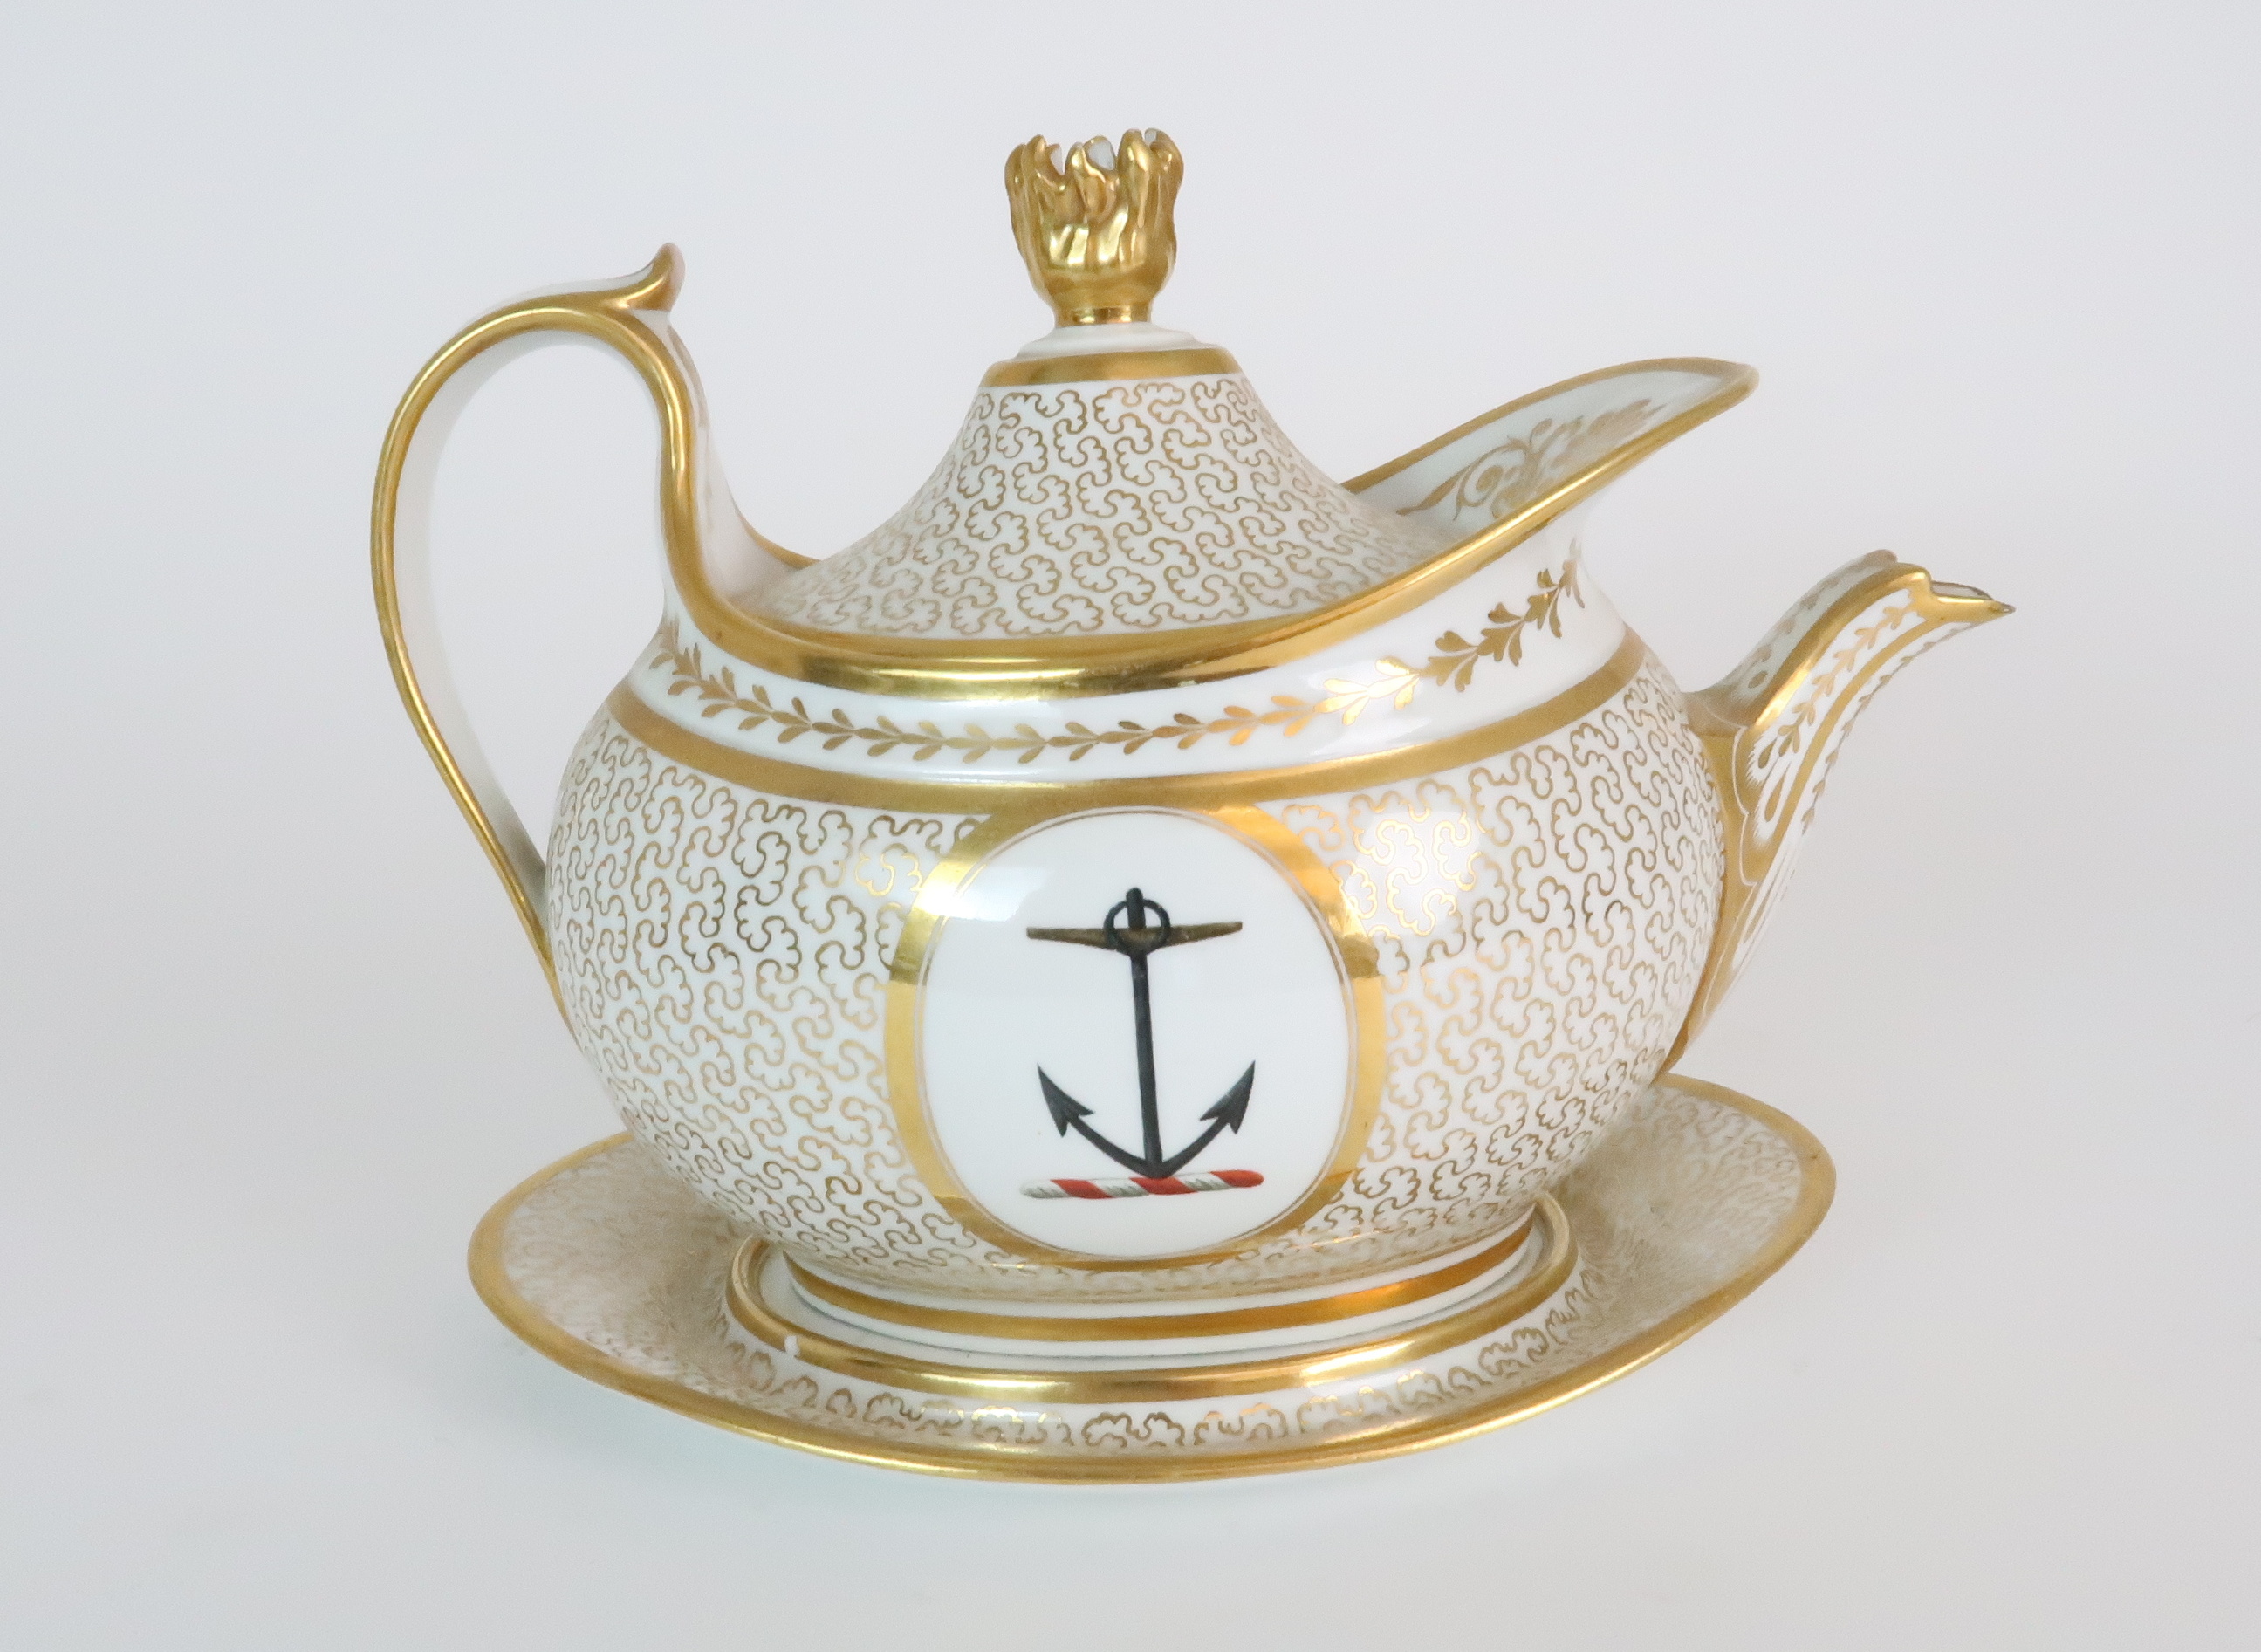 AN EARLY 19TH CENTURY BARR FLIGHT & BARR OVAL TEAPOT, COVER AND MATCHING STAND the cover with gilt - Image 3 of 8